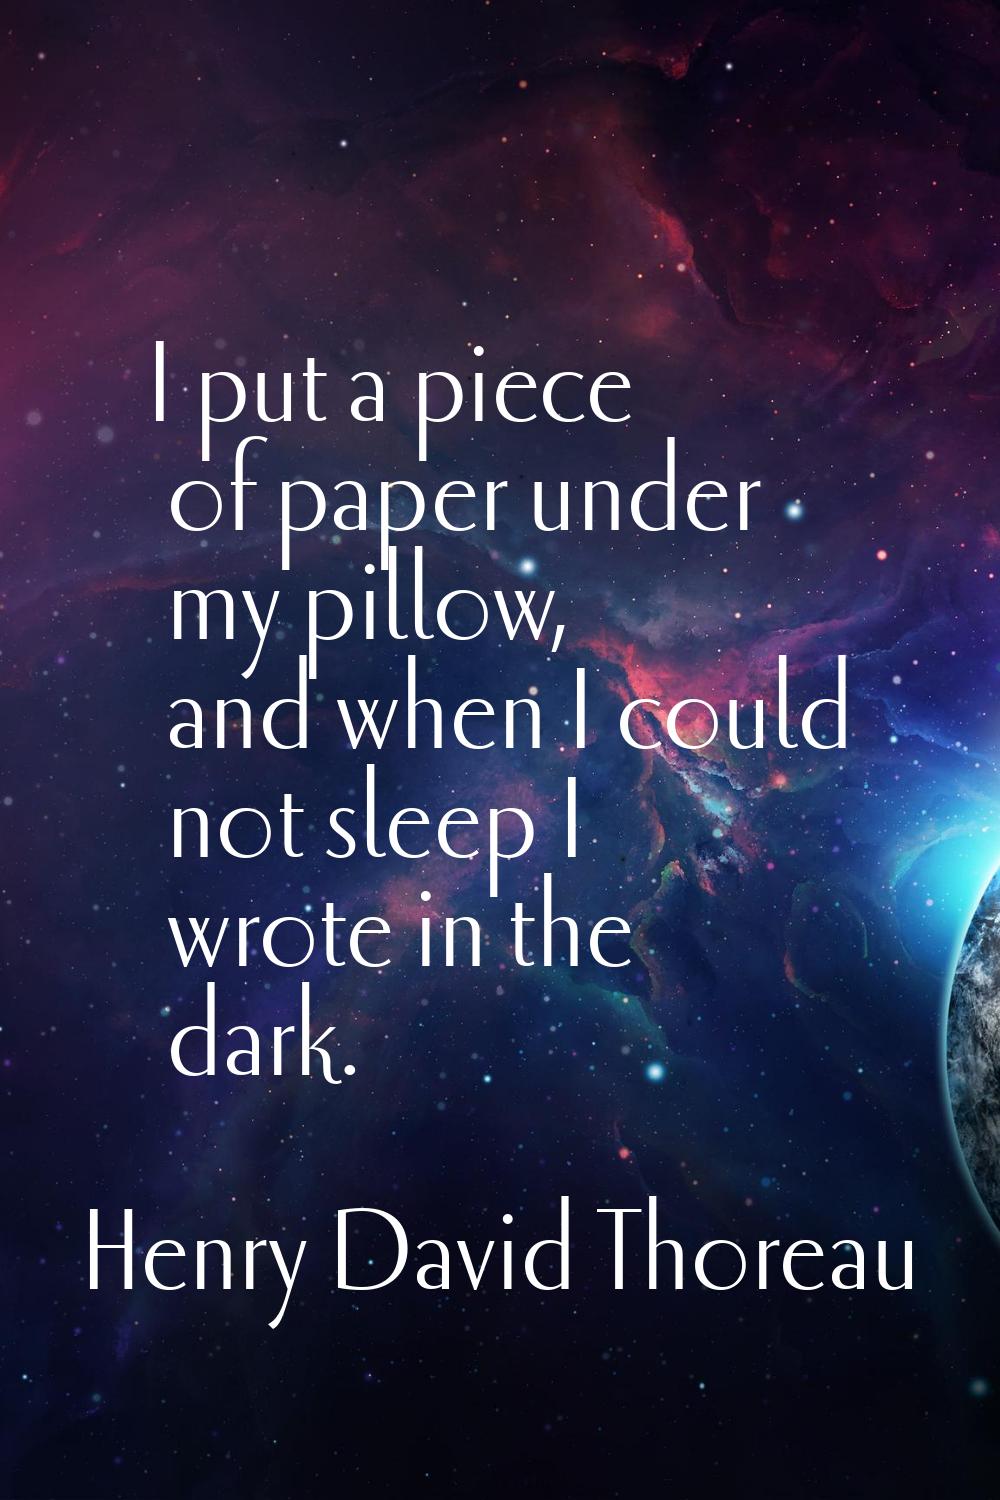 I put a piece of paper under my pillow, and when I could not sleep I wrote in the dark.